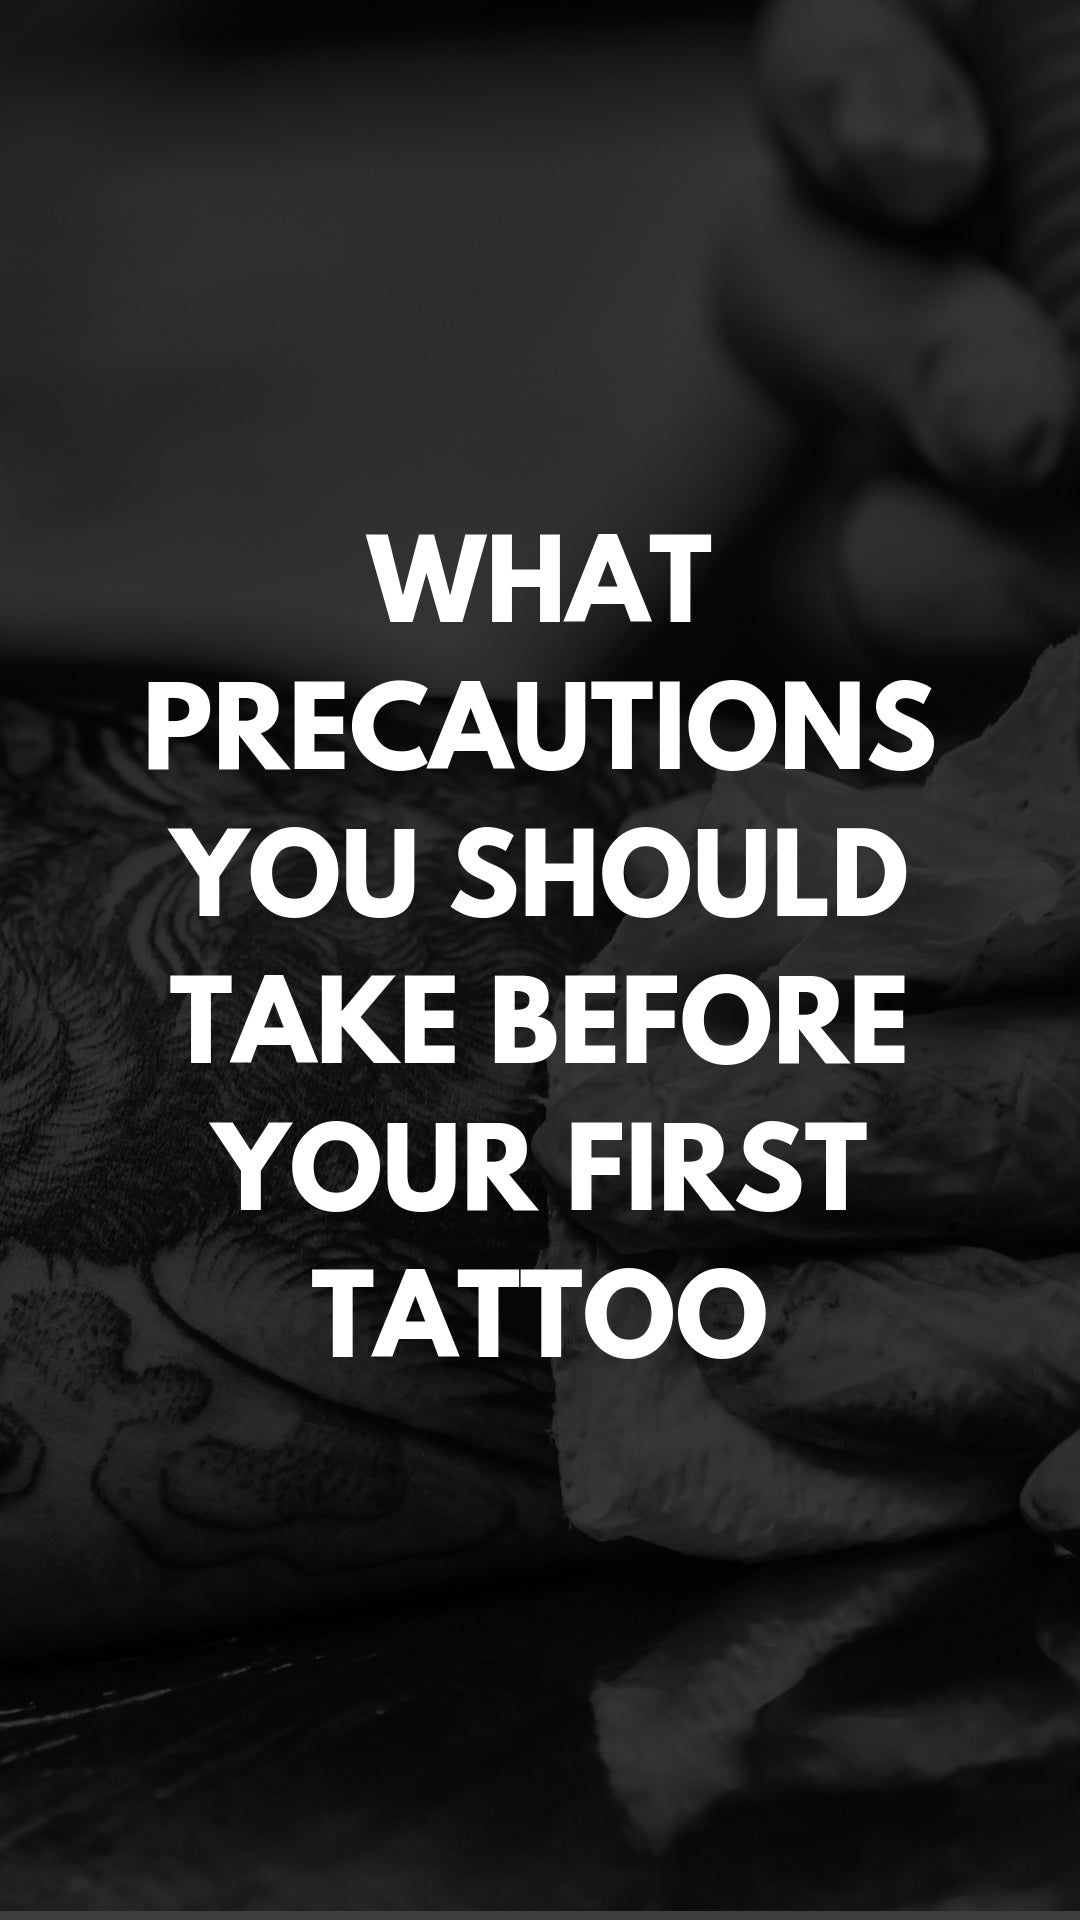 Can I Wear a Long Sleeve Over My New Tattoo: 6 Facts [Risks] – Dr. Numb®